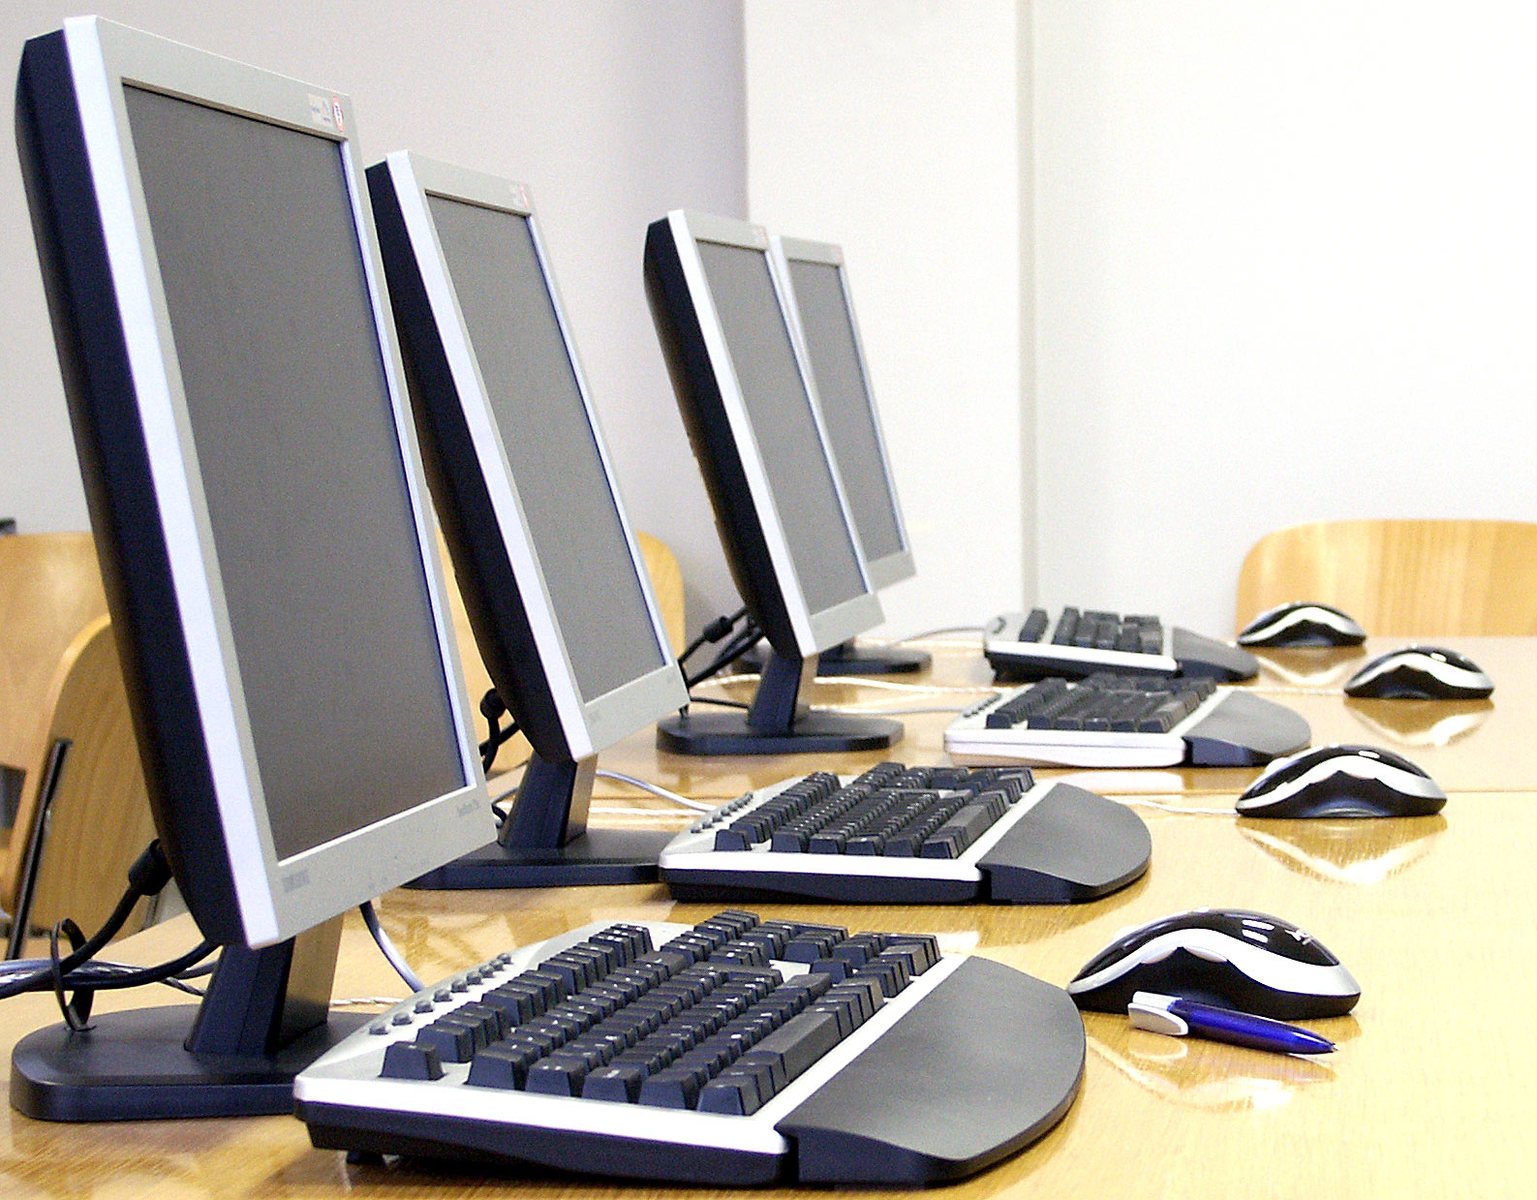 three computer monitors with keyboards and mouses on top